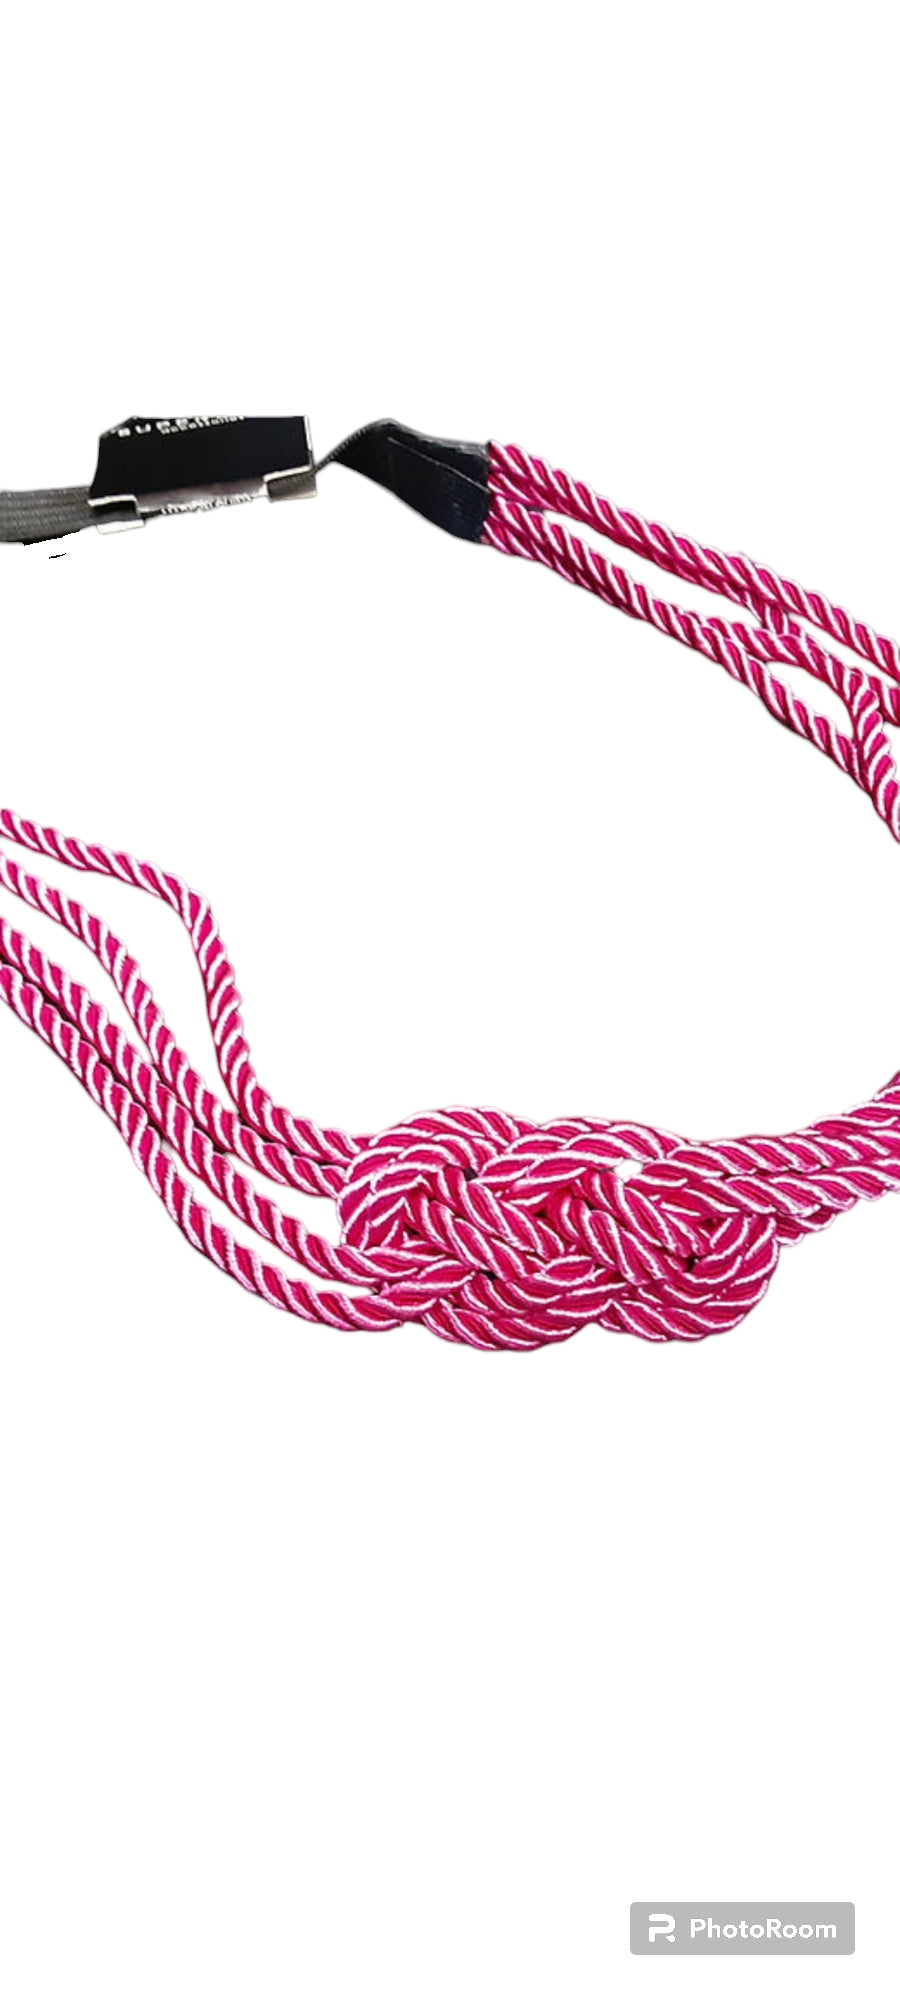 Rope Knot Colorful Stretch Headband